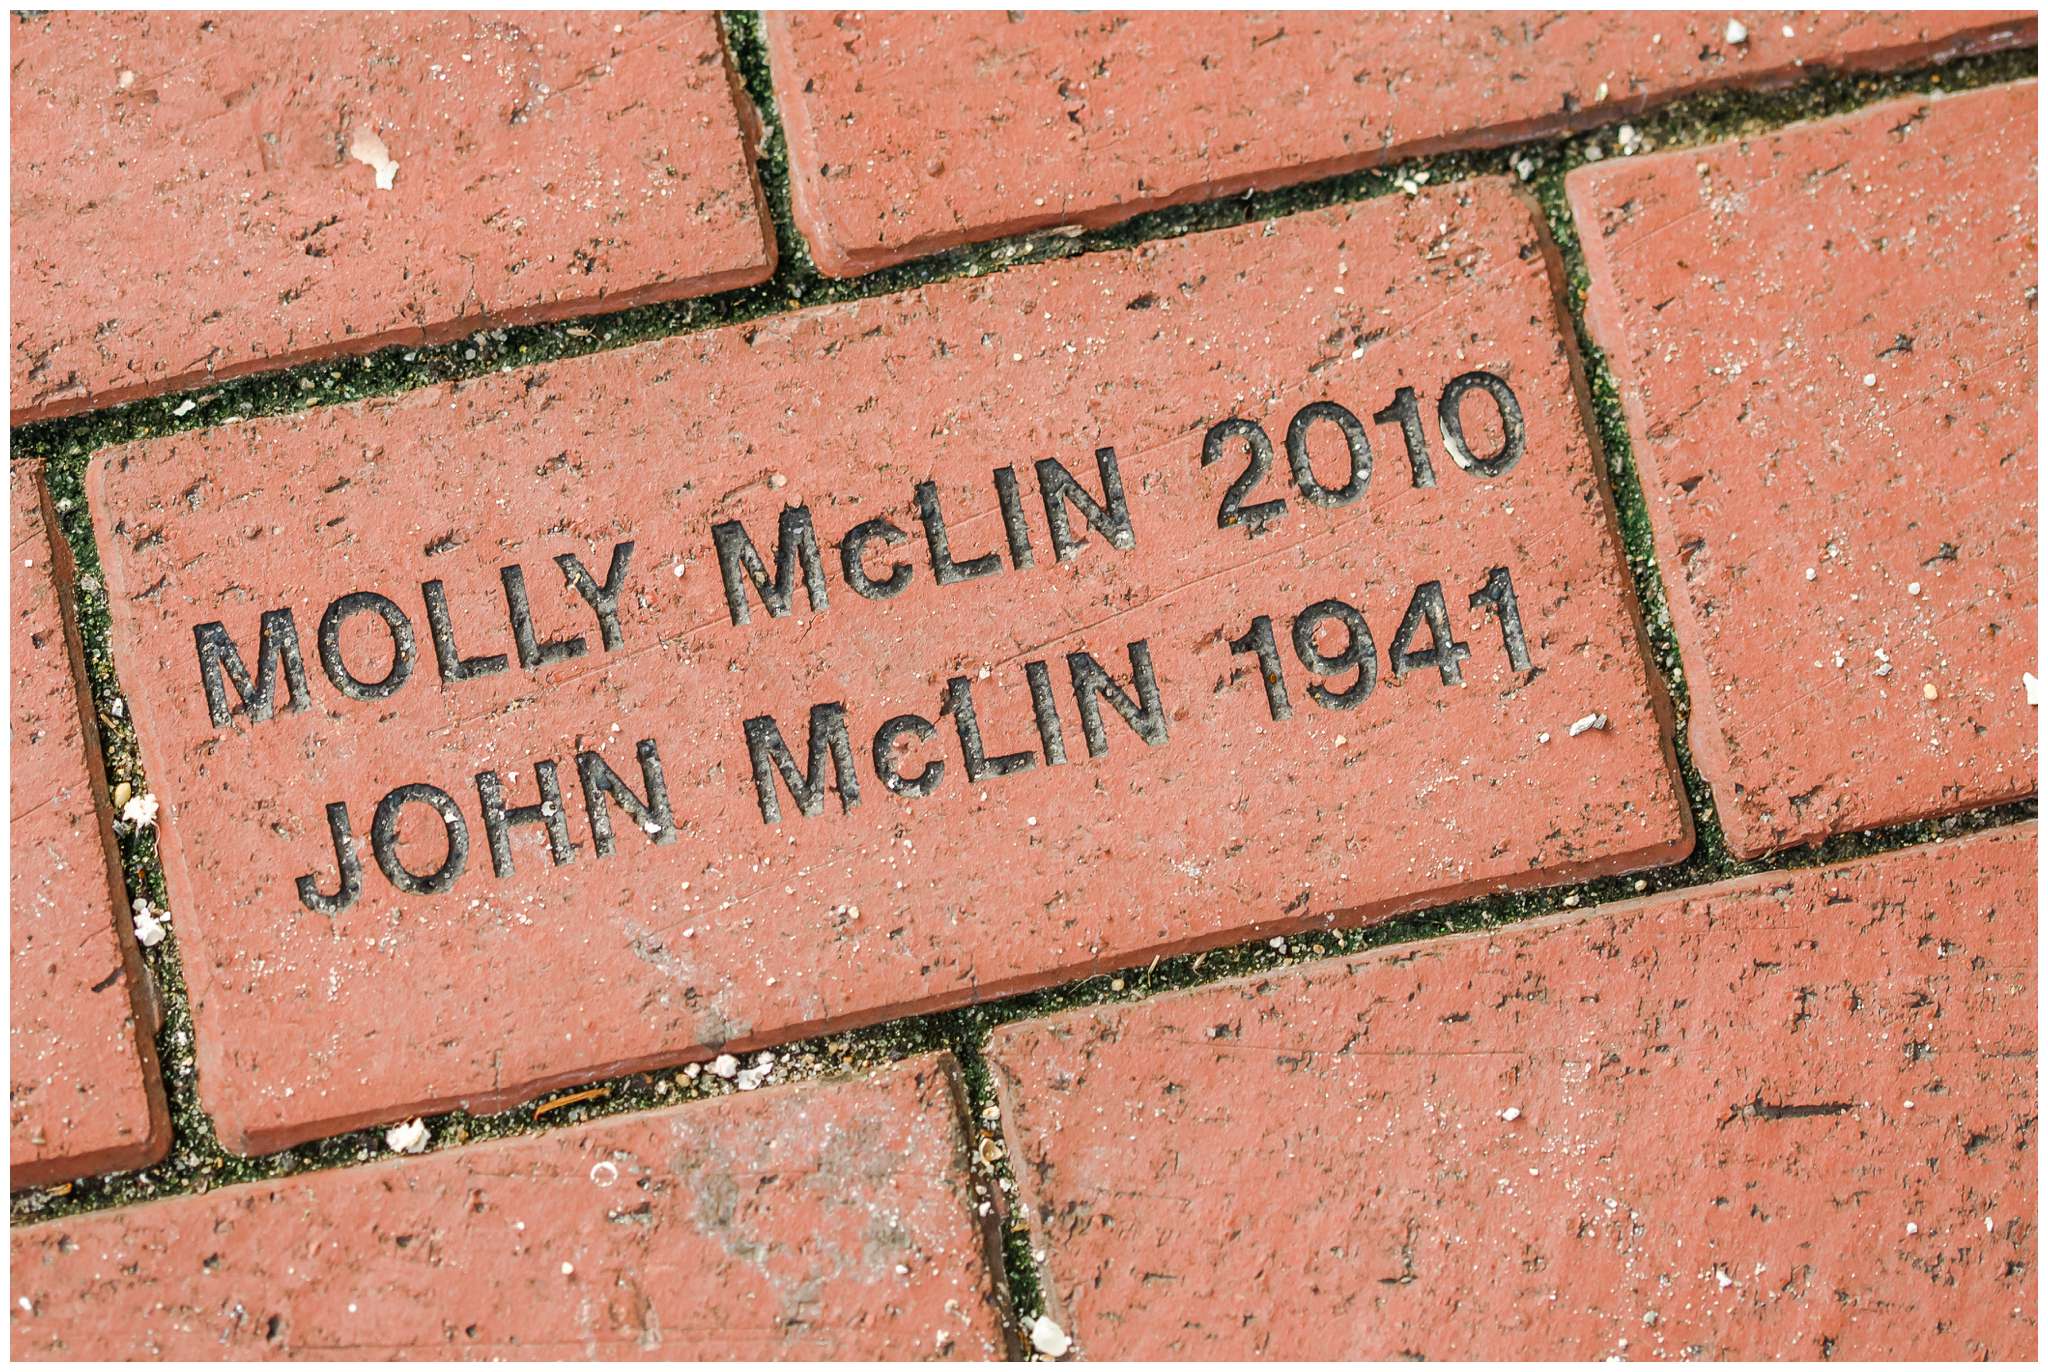  This is a brick at Molly's High School where she graduated with her name and her Grandfather's name. I had to grab a picture for the memory!&nbsp; 